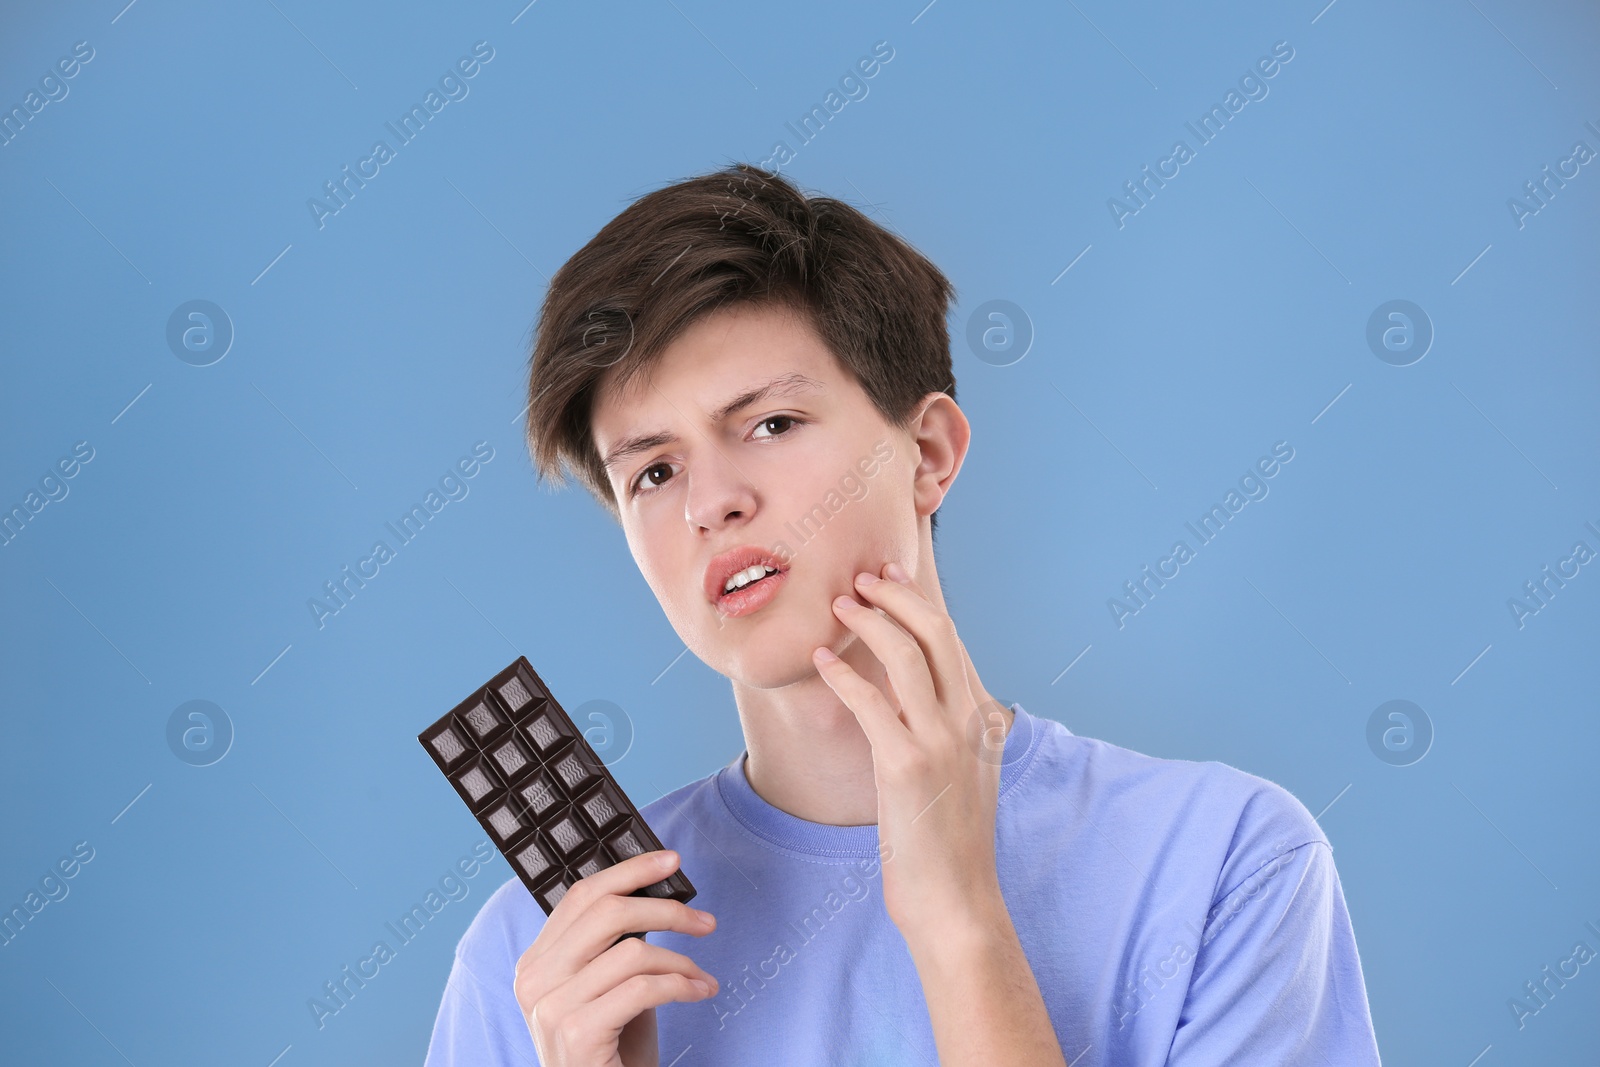 Photo of Teenage boy with acne problem holding chocolate on grey background. Skin allergy